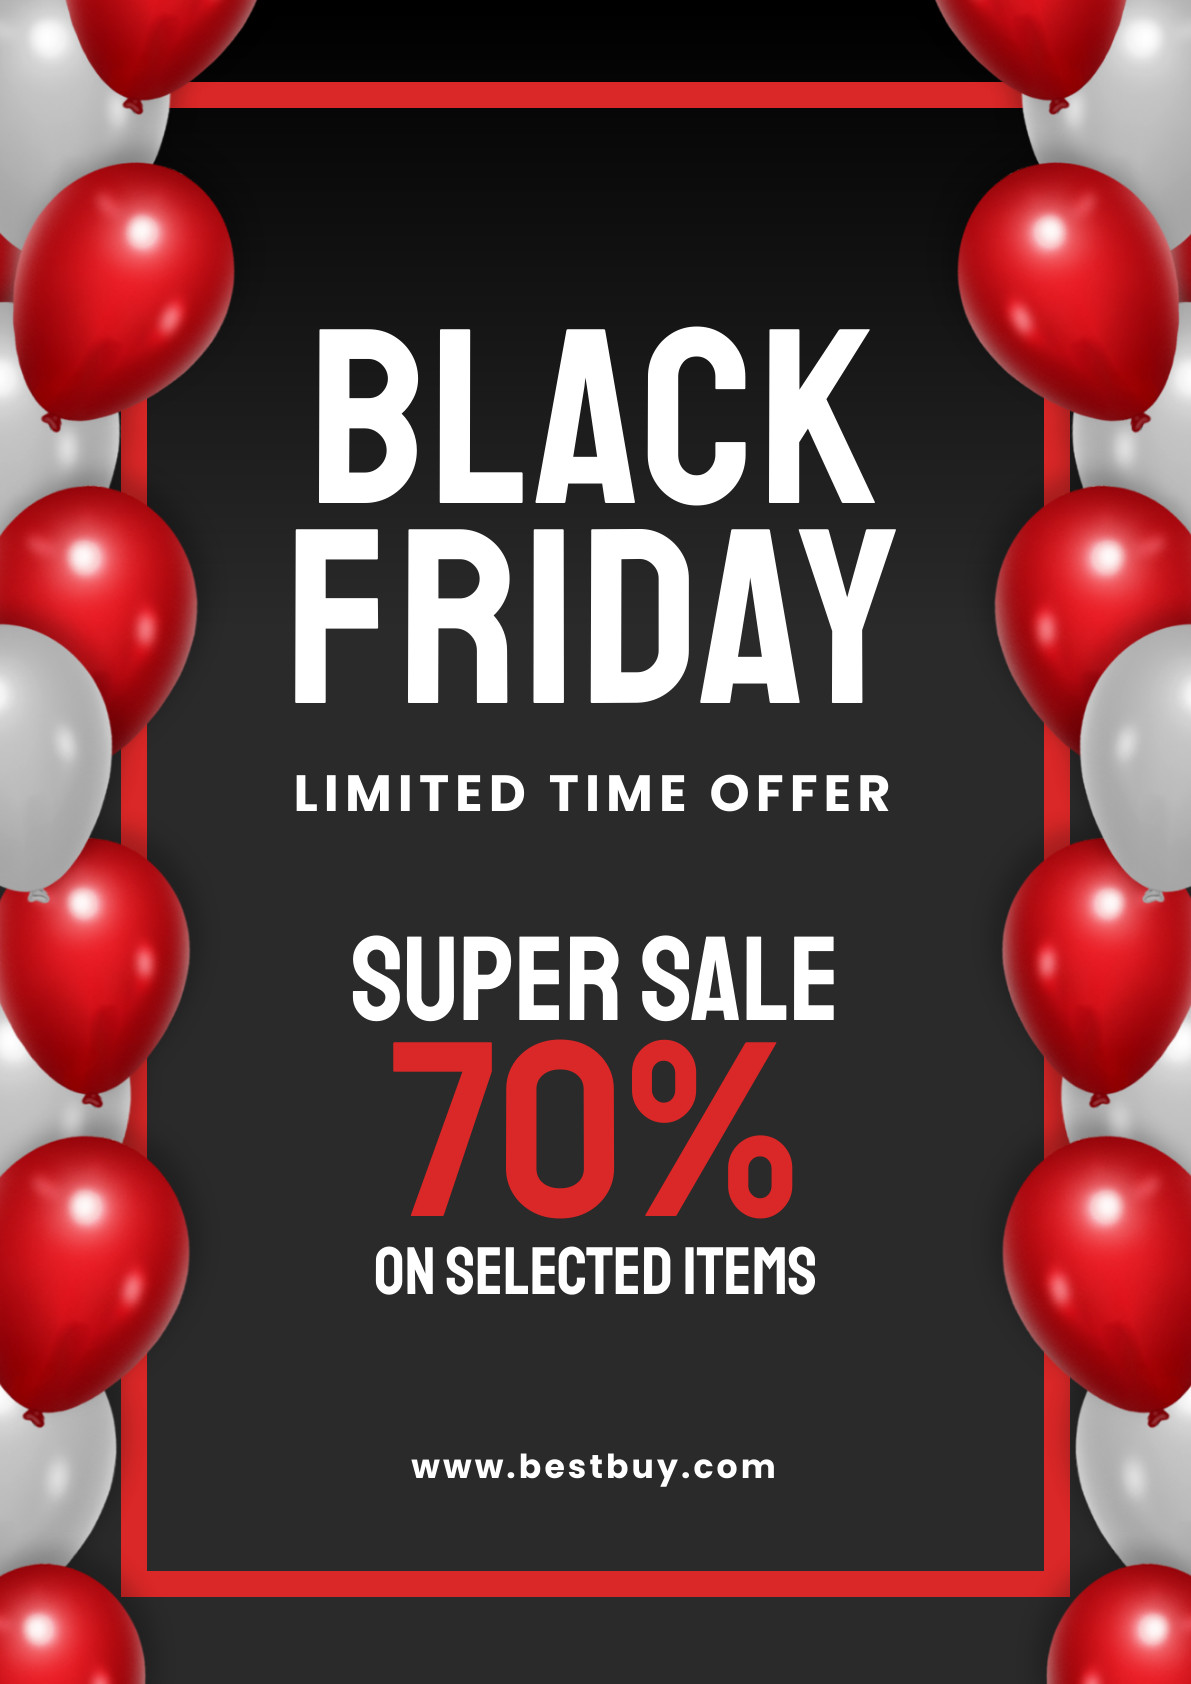 Black Friday Balloon Time Offer Poster 1191x1684